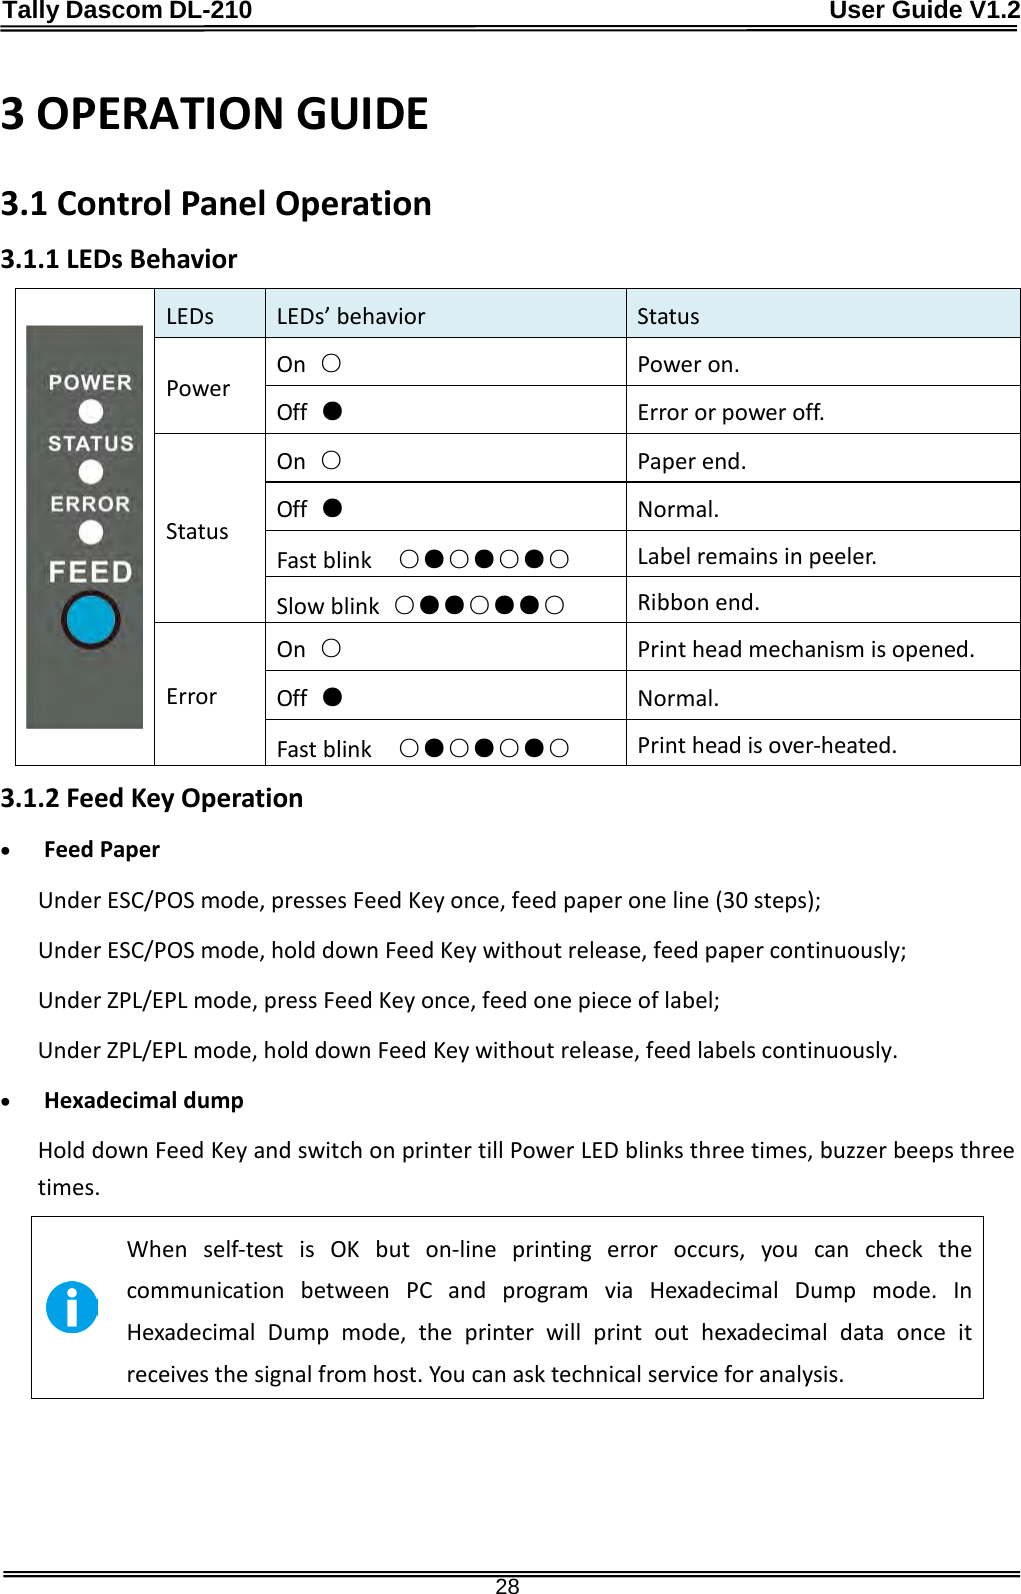 Tally Dascom DL-210                                              User Guide V1.2  28 3 OPERATION GUIDE 3.1 Control Panel Operation 3.1.1 LEDs Behavior  LEDs  LEDs’ behavior Status Power On ○ Power on. Off ● Error or power off. Status On ○ Paper end. Off ● Normal. Fast blink  ○●○●○●○ Label remains in peeler. Slow blink ○●●○●●○ Ribbon end. Error On ○ Print head mechanism is opened. Off ● Normal. Fast blink  ○●○●○●○ Print head is over-heated. 3.1.2 Feed Key Operation • Feed Paper Under ESC/POS mode, presses Feed Key once, feed paper one line (30 steps); Under ESC/POS mode, hold down Feed Key without release, feed paper continuously; Under ZPL/EPL mode, press Feed Key once, feed one piece of label; Under ZPL/EPL mode, hold down Feed Key without release, feed labels continuously. • Hexadecimal dump Hold down Feed Key and switch on printer till Power LED blinks three times, buzzer beeps three times.  When self-test is OK but on-line printing error occurs, you can check the communication between PC and program via Hexadecimal Dump mode. In Hexadecimal Dump mode, the printer will print out hexadecimal data once it receives the signal from host. You can ask technical service for analysis.  